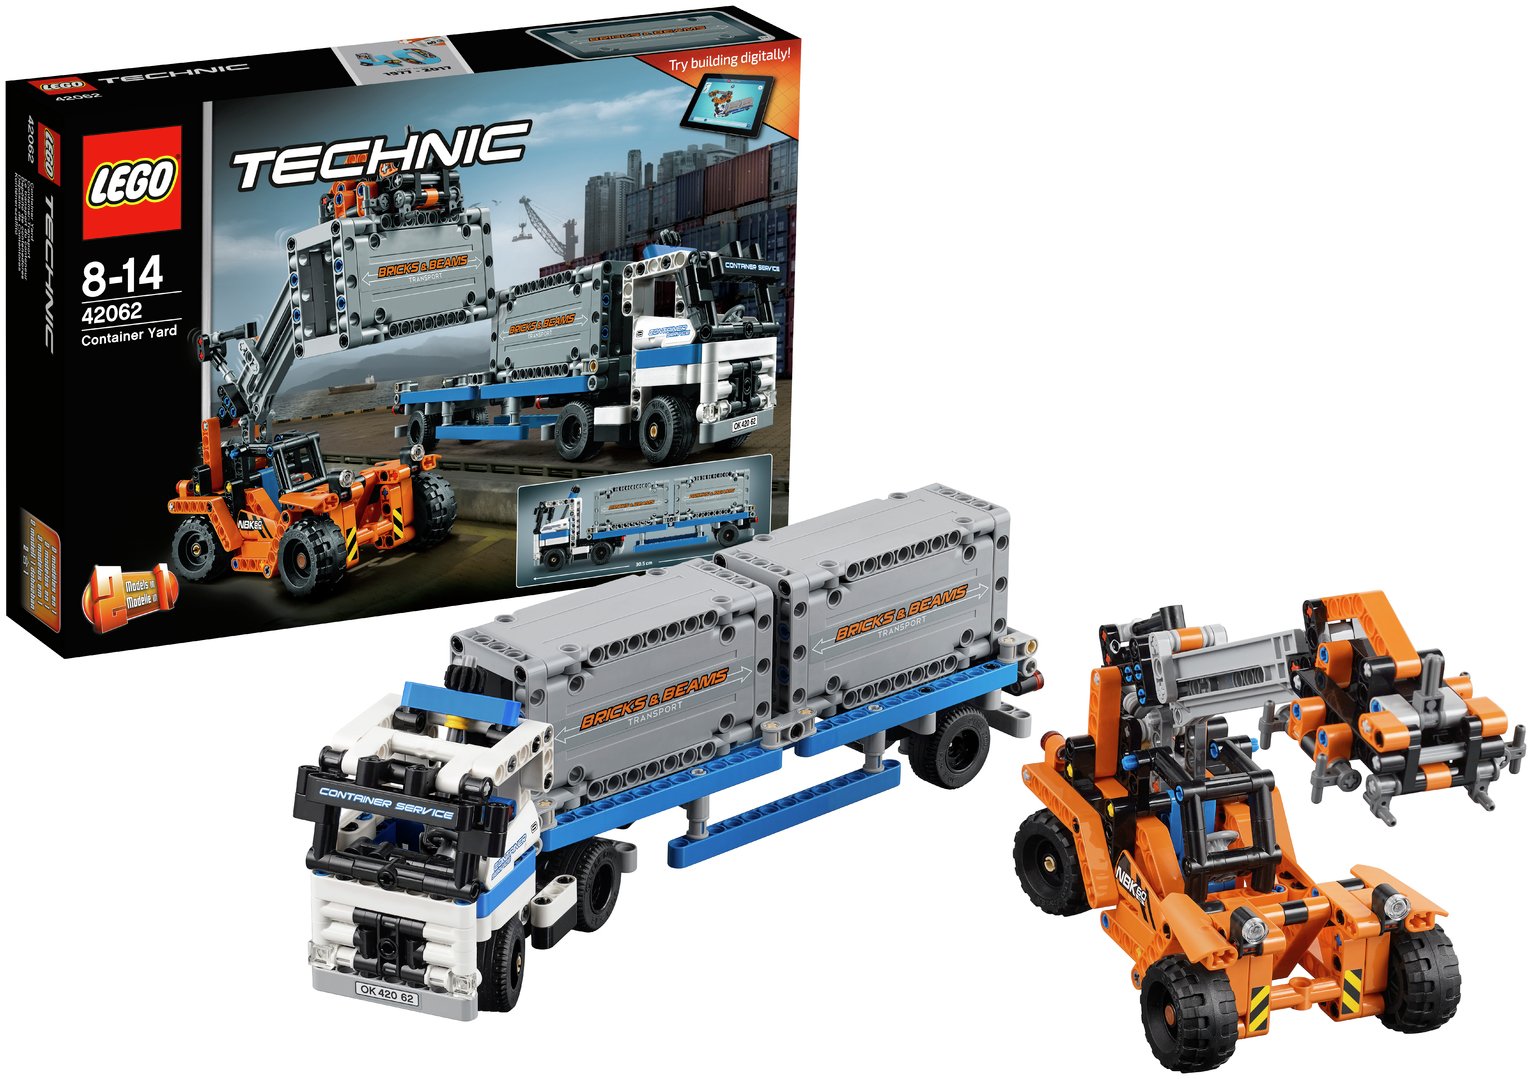 LEGO City Container Yard - 42062